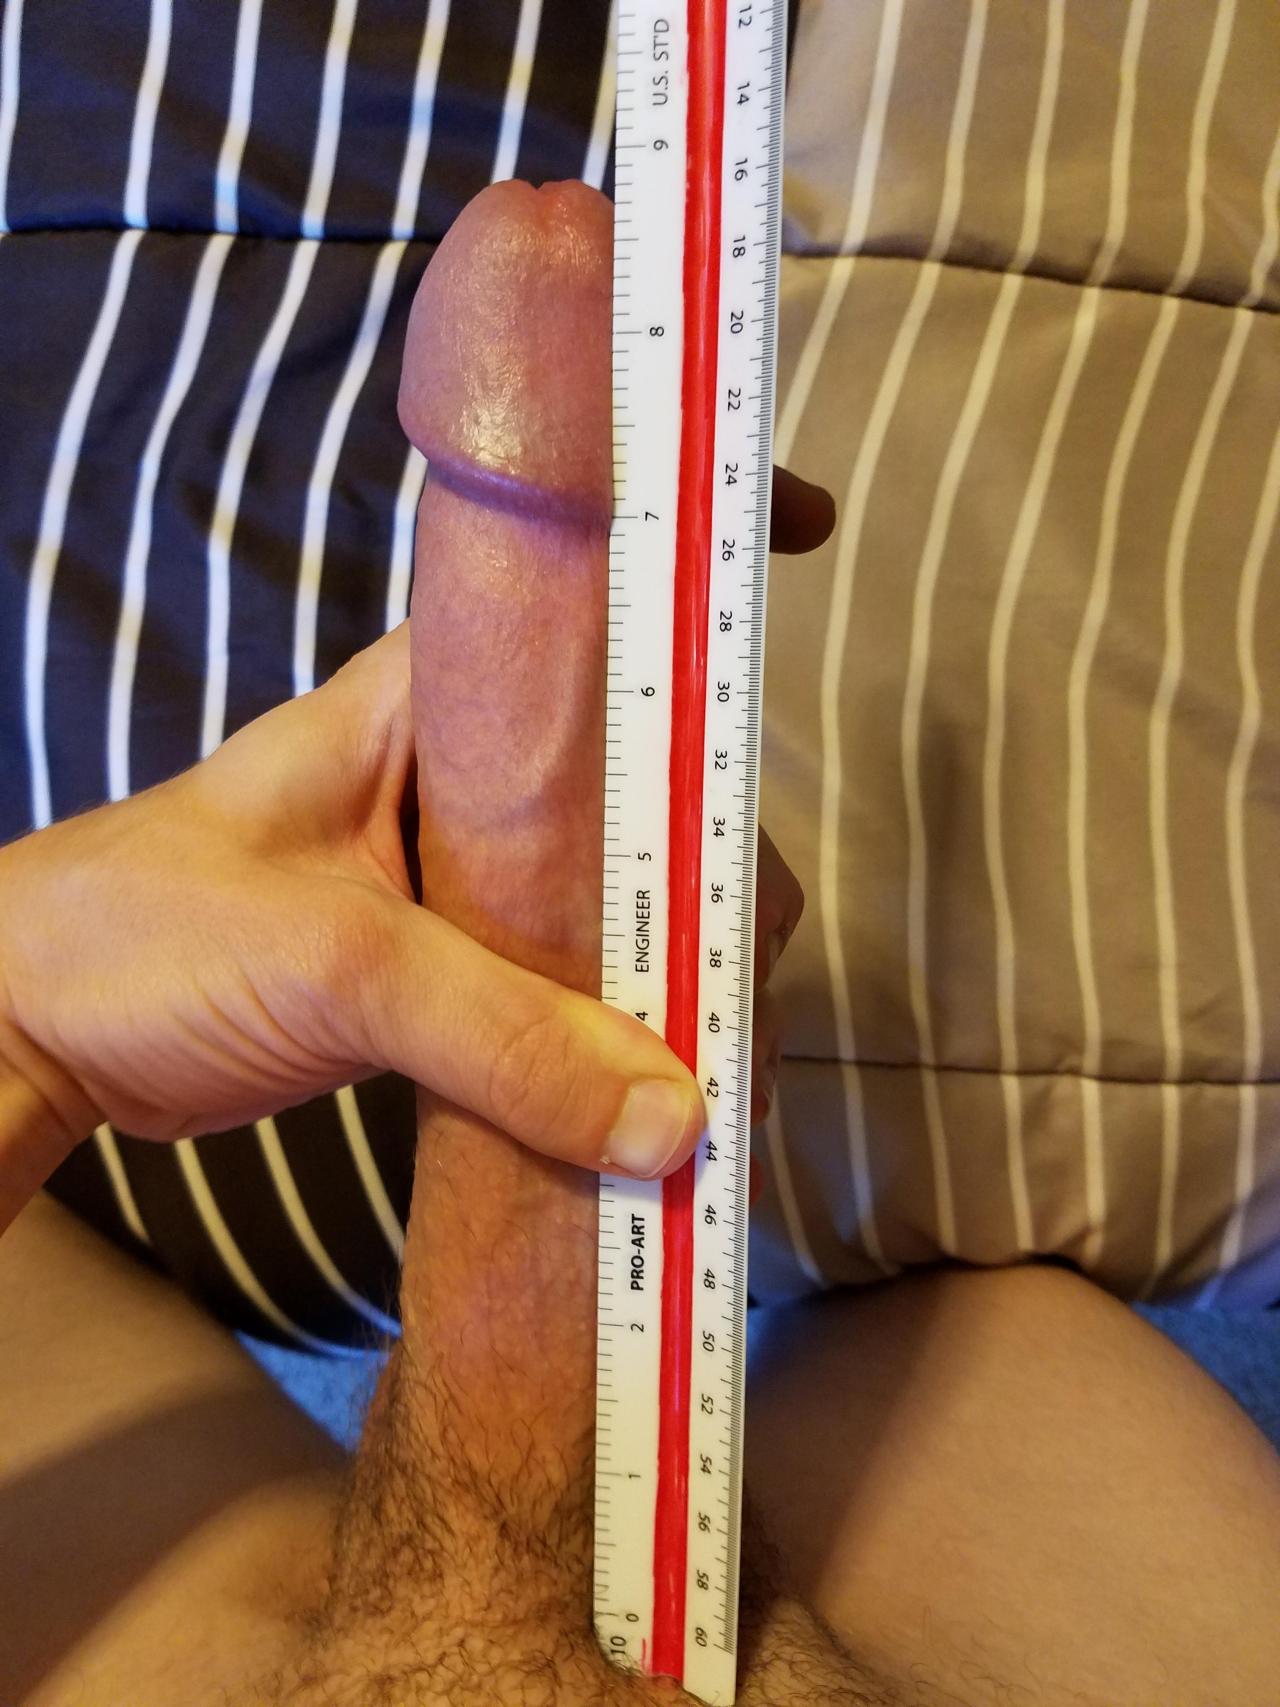 bigdickdetective: Follow the bigdickdetective for more cocks that my wife and I find